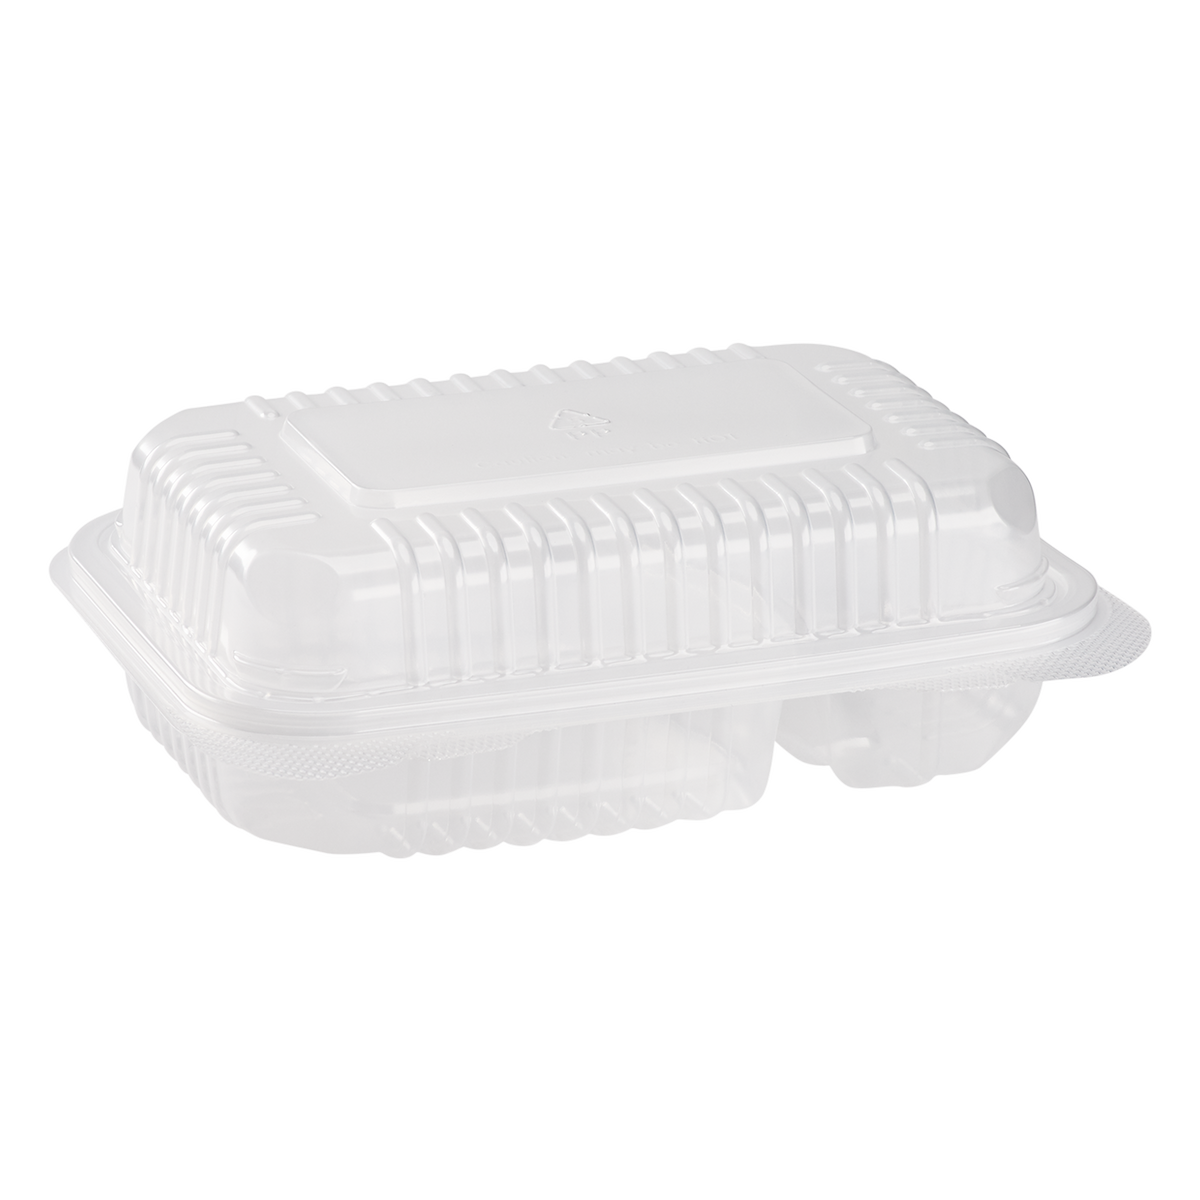 7''x7'' Hinged Containers - Medium Clamshell Takeout Boxes - Karat PP  Plastic - 250 count